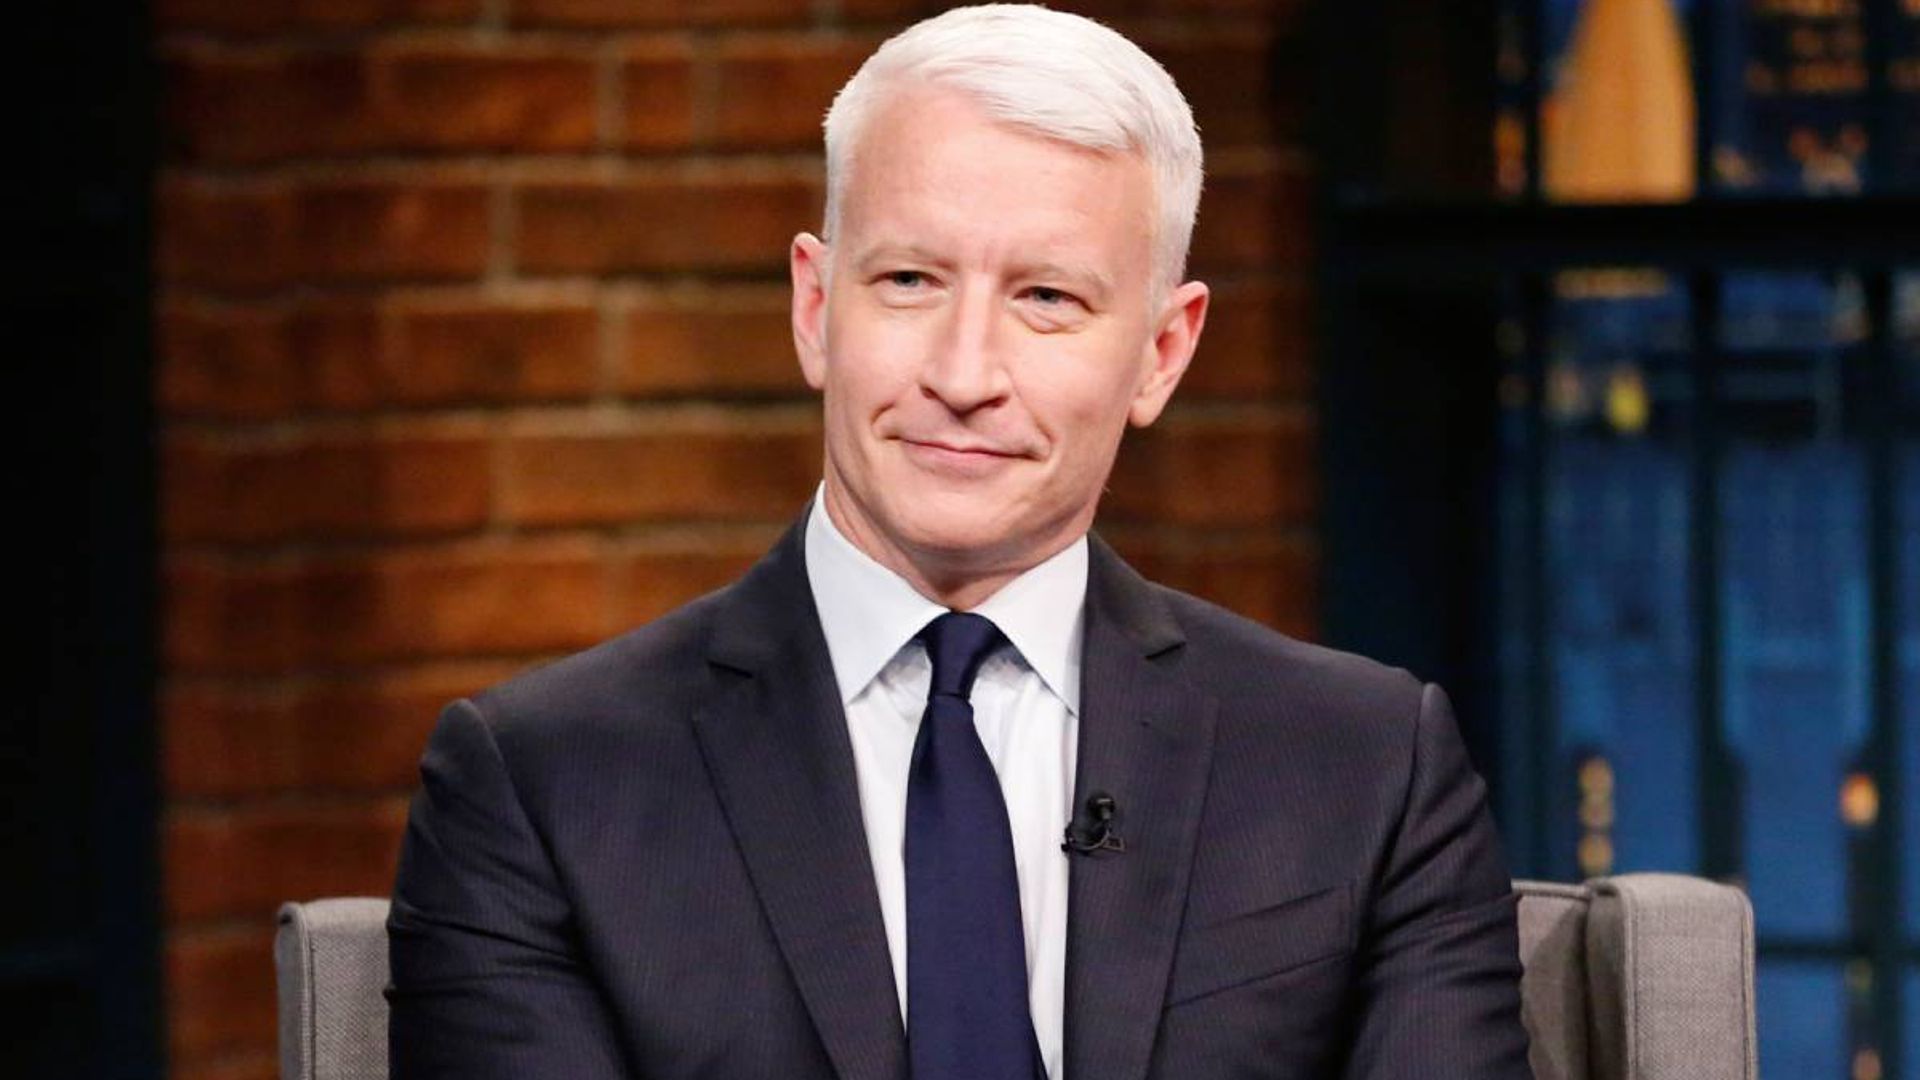 anderson cooper revelation son live on air